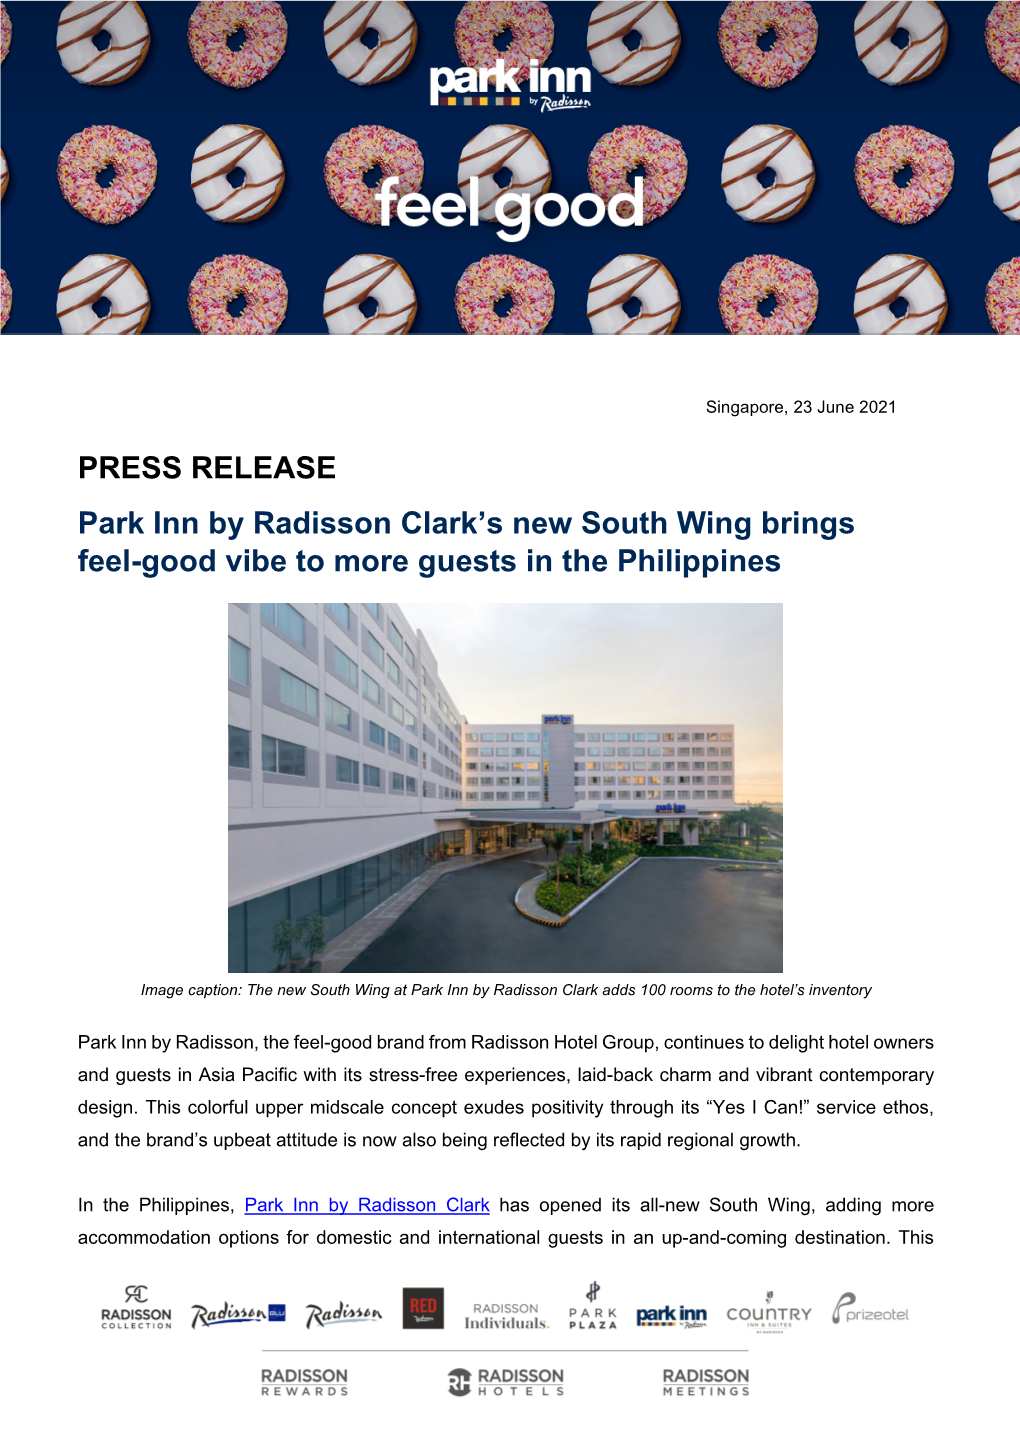 PRESS RELEASE Park Inn by Radisson Clark's New South Wing Brings Feel-Good Vibe to More Guests in the Philippines